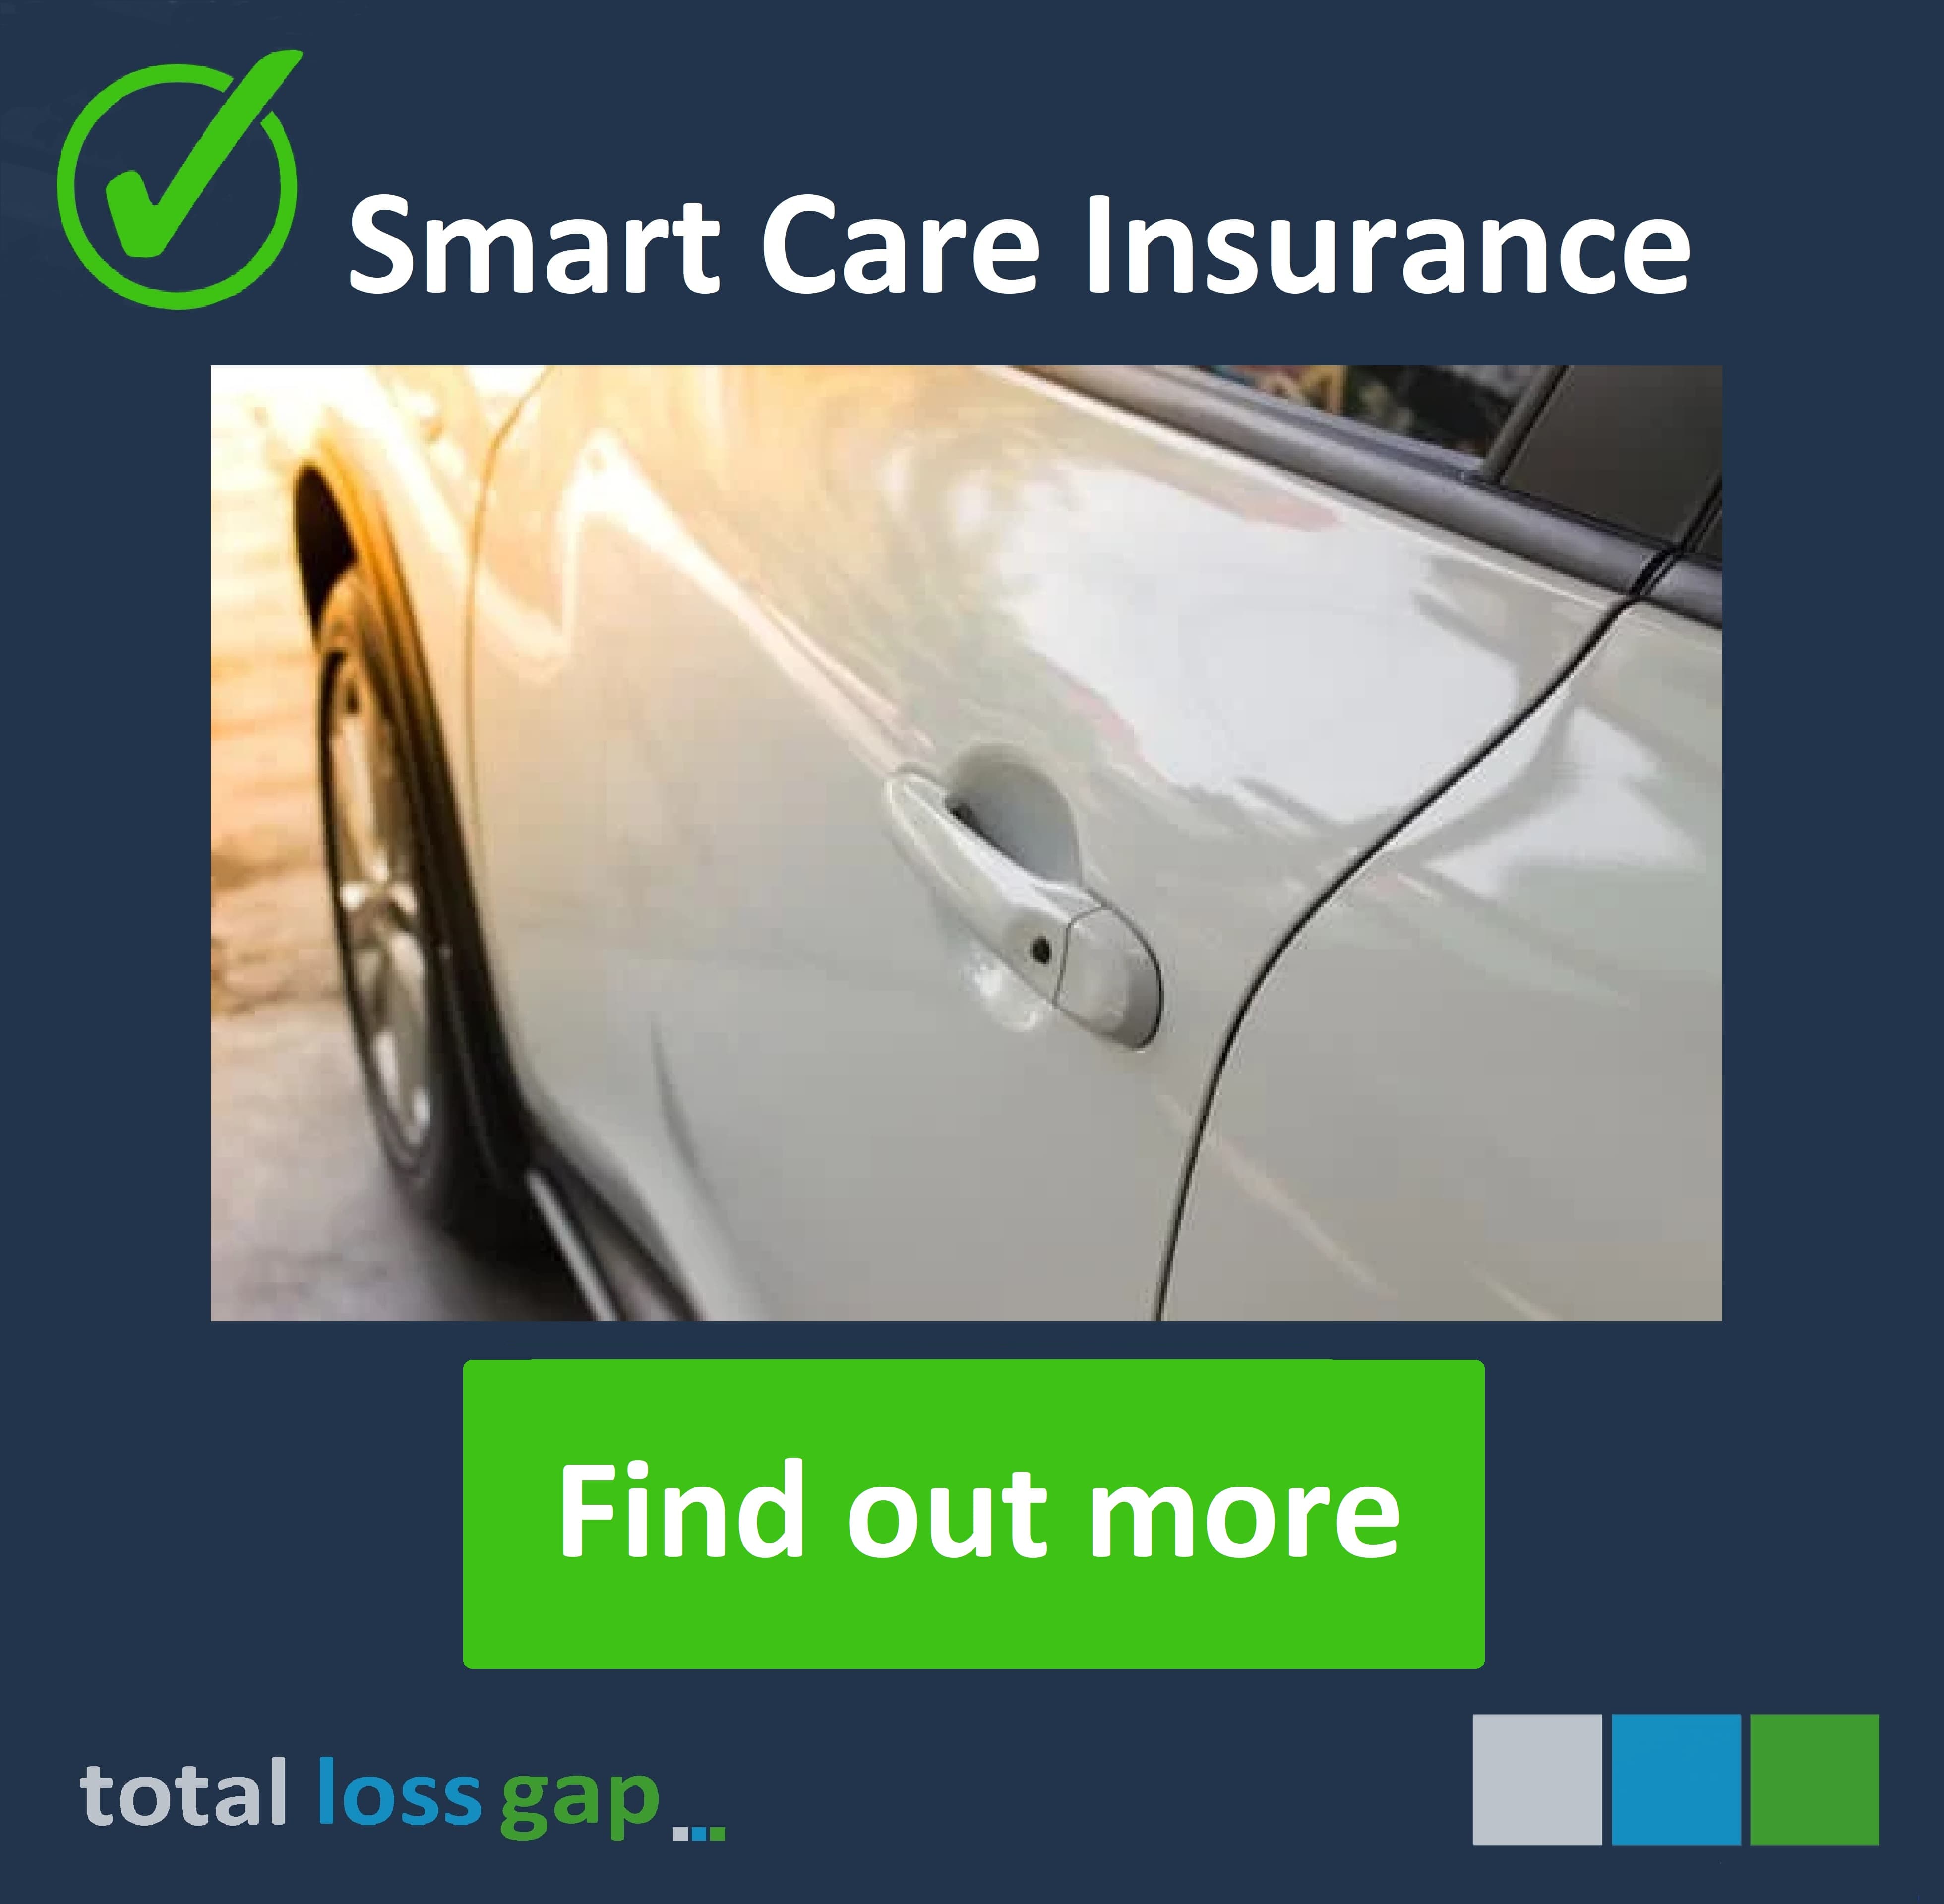 Find out more about Smart Care cover